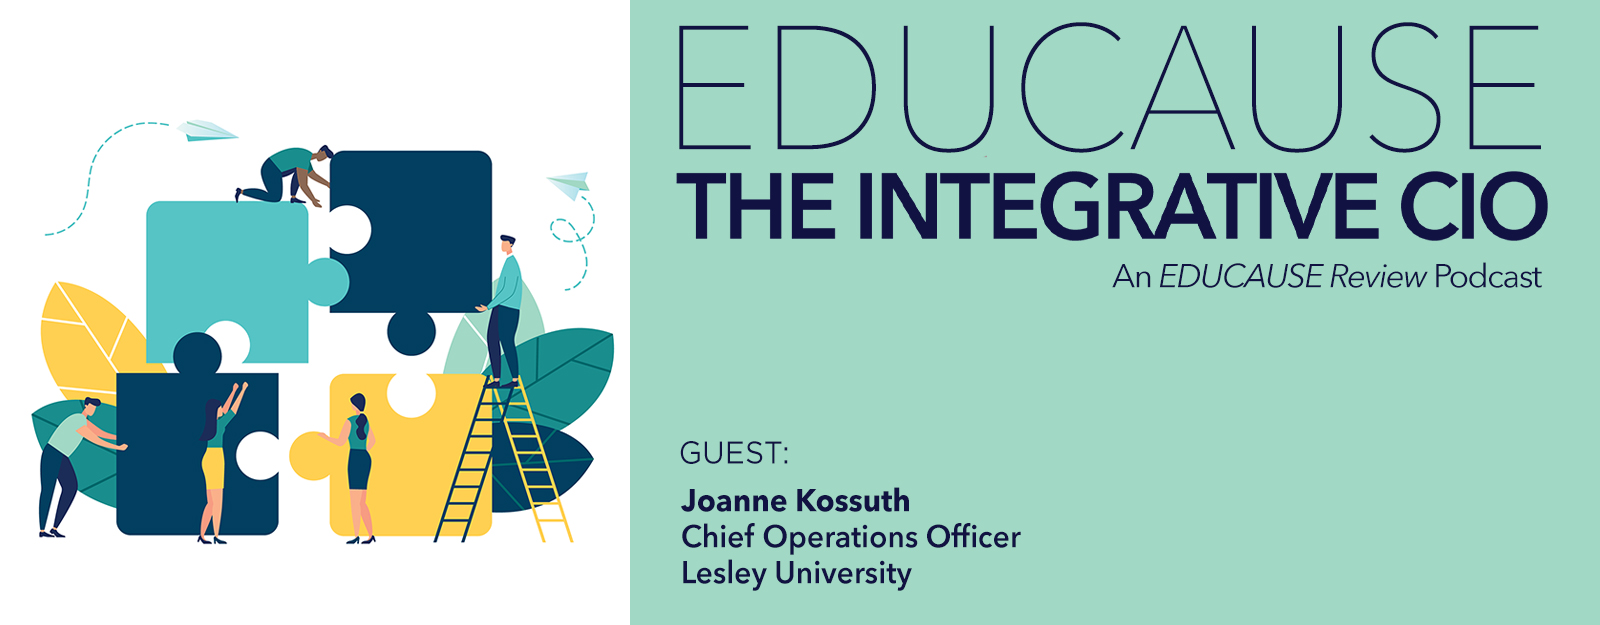 Joanne Kossuth on Expanding the Executive Role Beyond IT